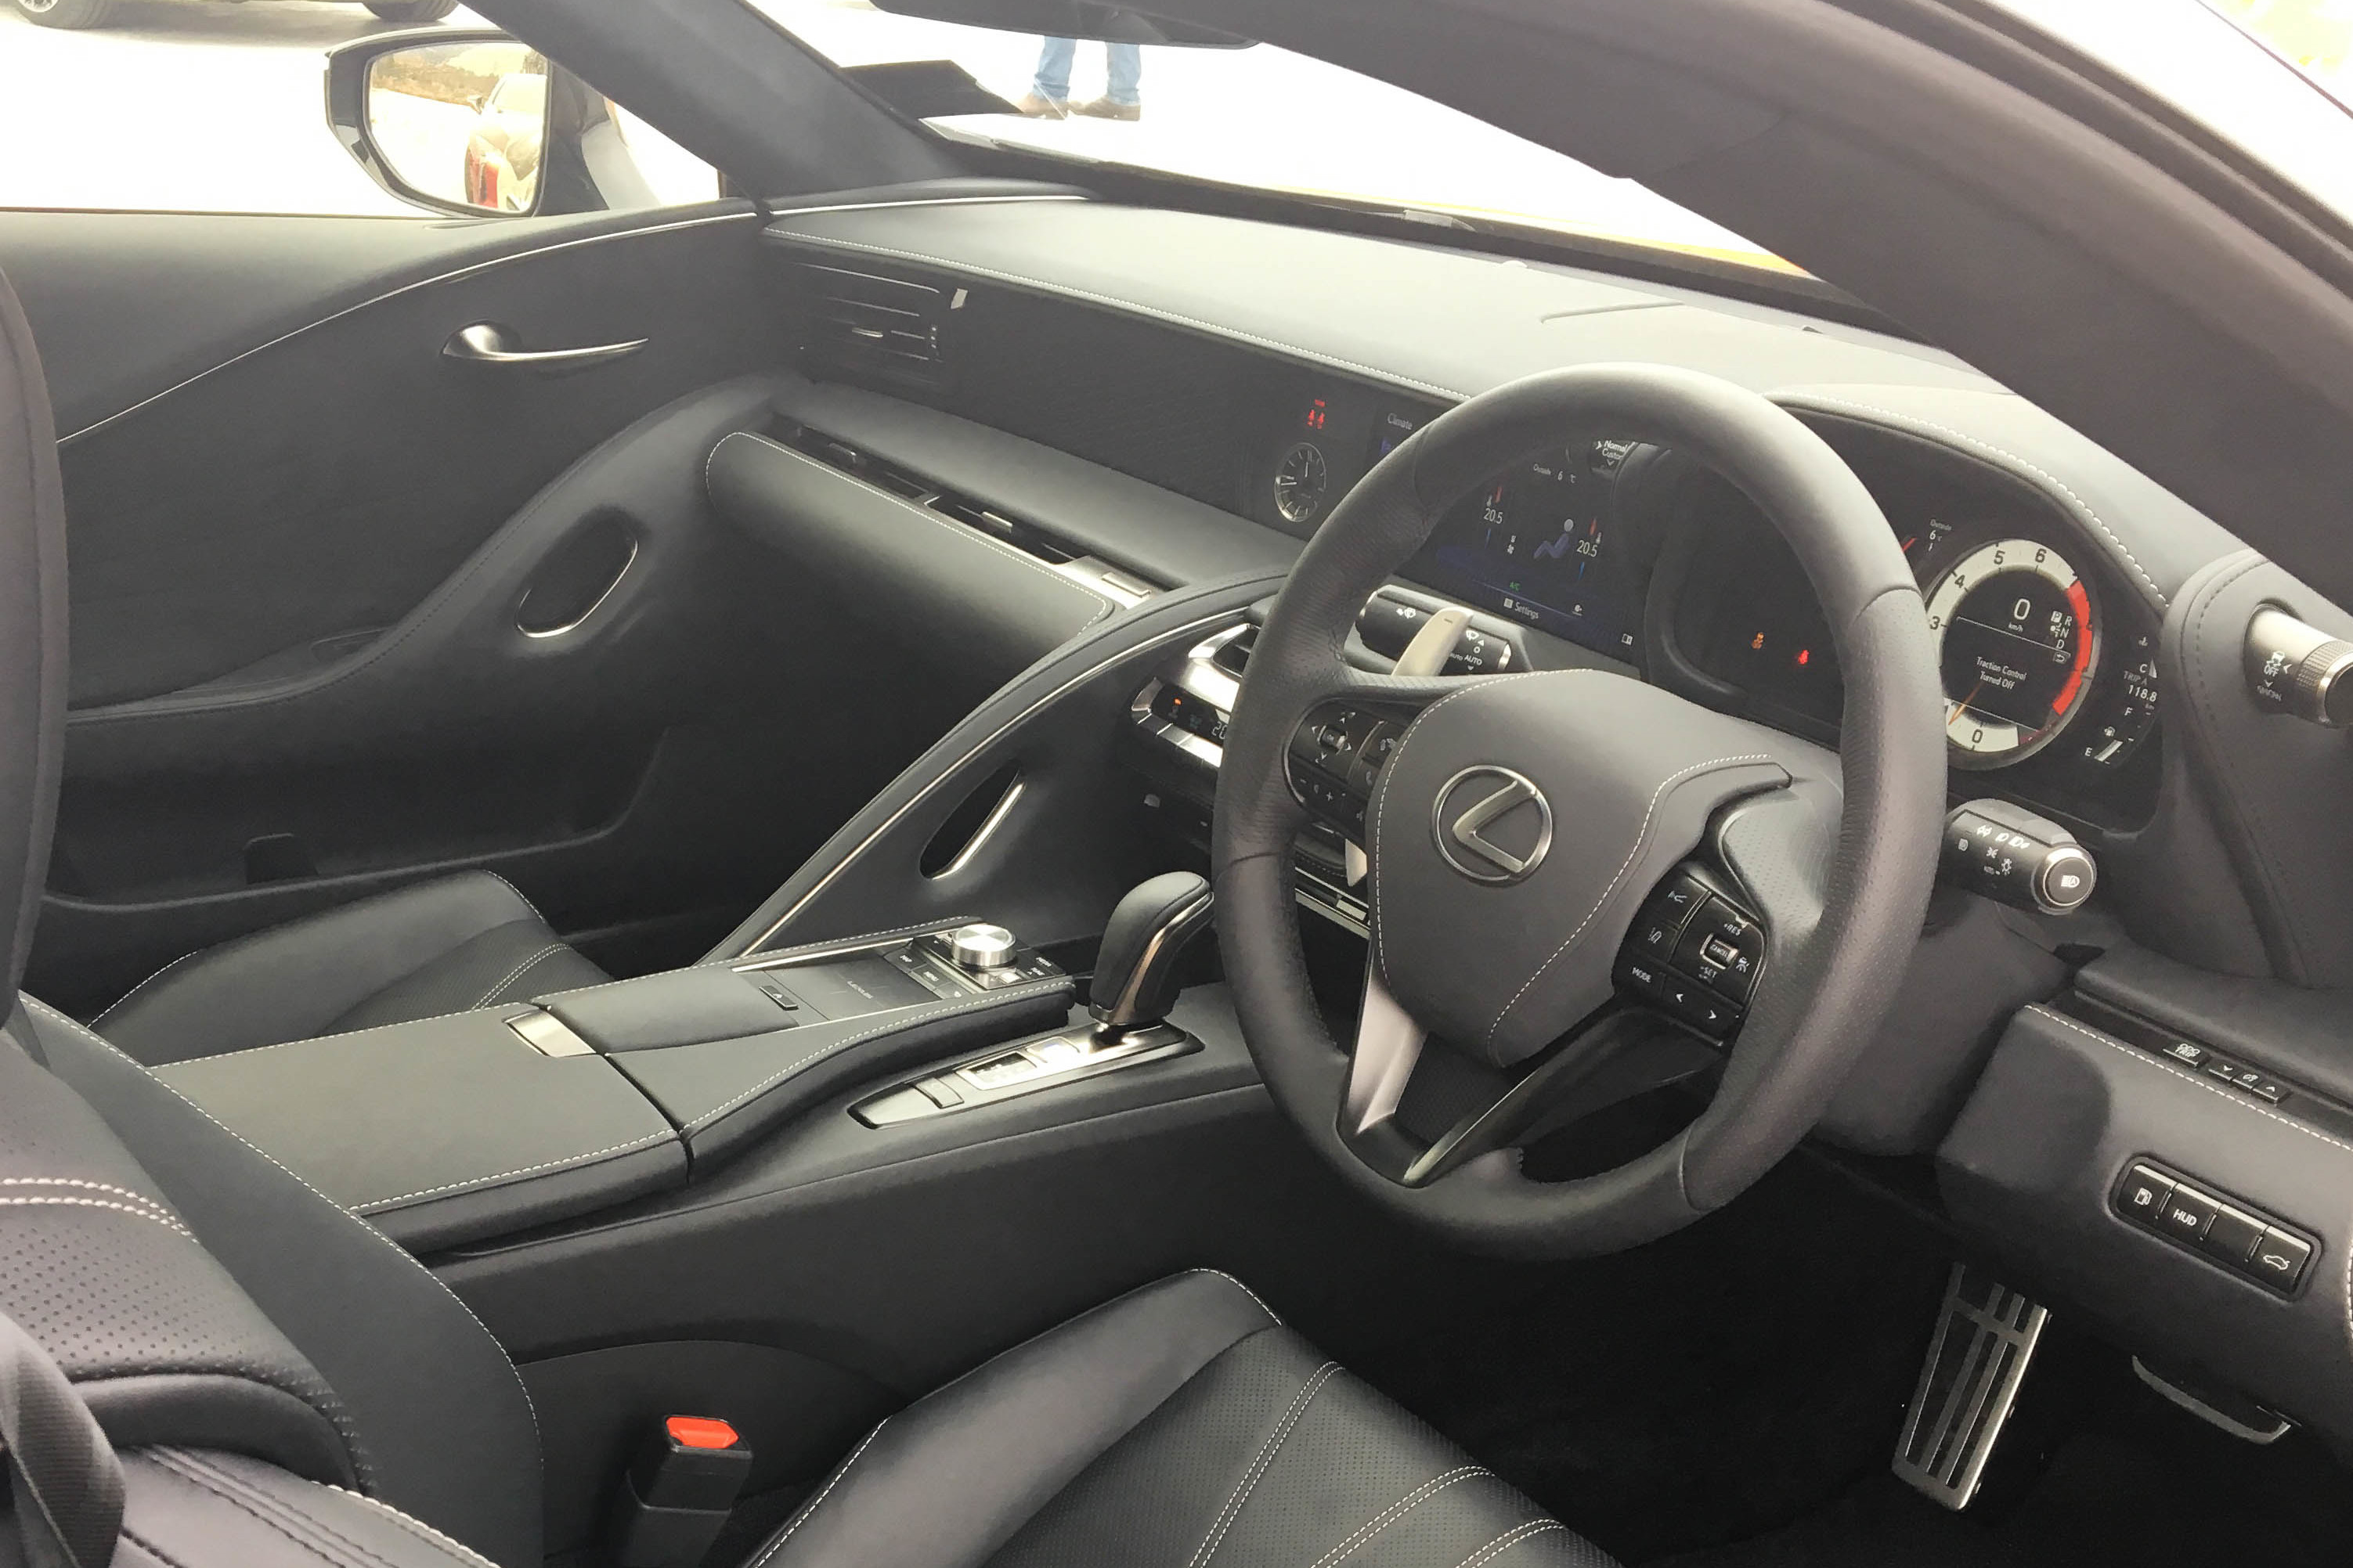 File:Lexus LC 500 & LC 500h interior (cropped).jpg - Wikimedia Commons